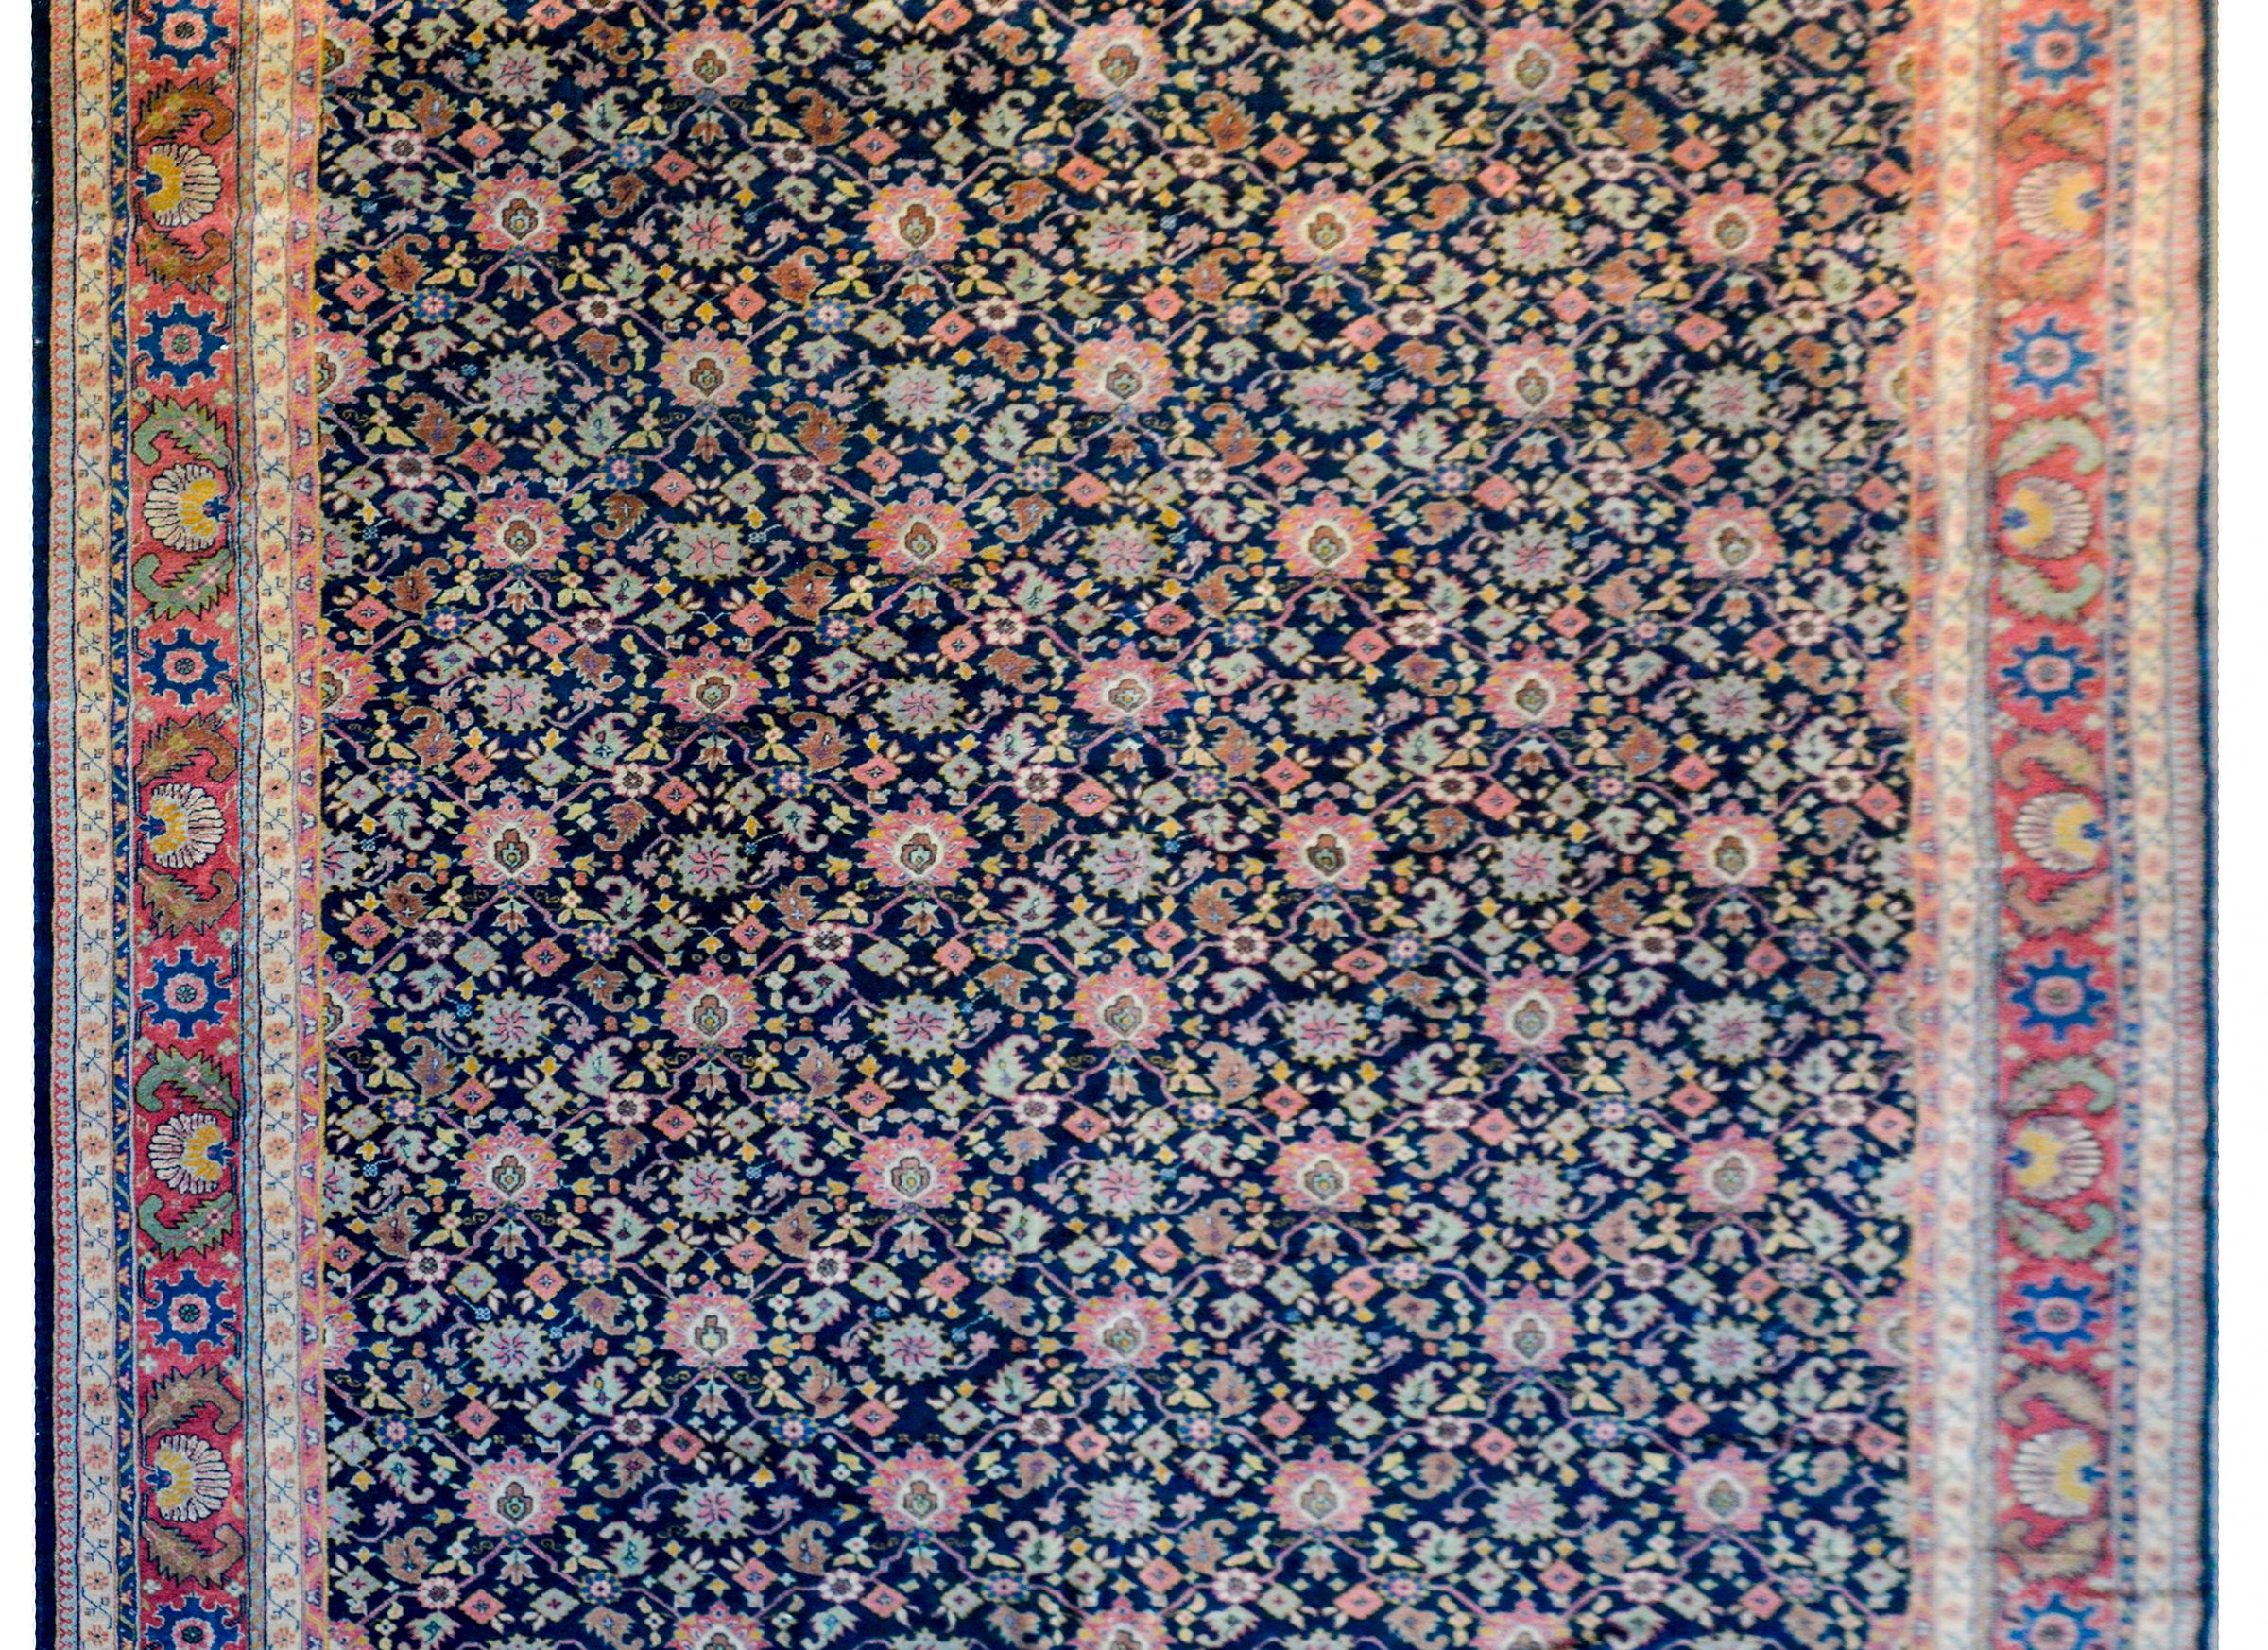 An exquisite early 20th century Turkish Mahal style rug with an all-over lattice pattern with large and small flowers woven in pink, gold, salmon, and green, all on a dark indigo background. The border is wide with large central stripe with a bold